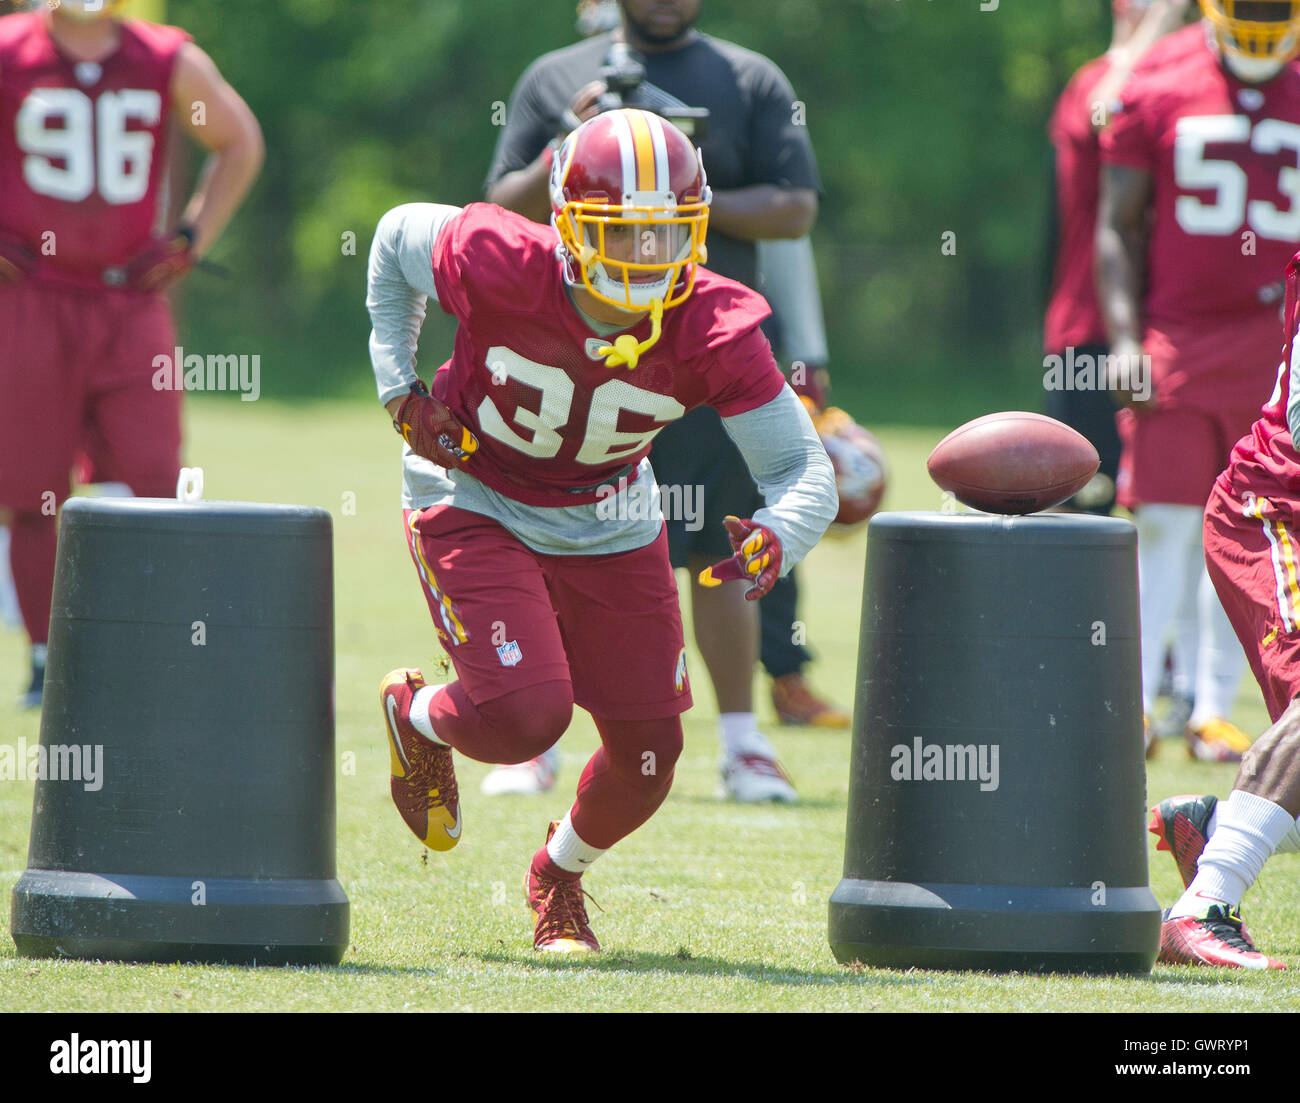 Washington Redskins safety Su'a Cravens (36), who was selected in the second round of the 2016 NFL Draft, participates in an organized team activity (OTA) at Redskins Park in Ashburn, Virginia on Wednesday, May 25, 2015. Credit: Ron Sachs / CNP/MediaPunch Stock Photo